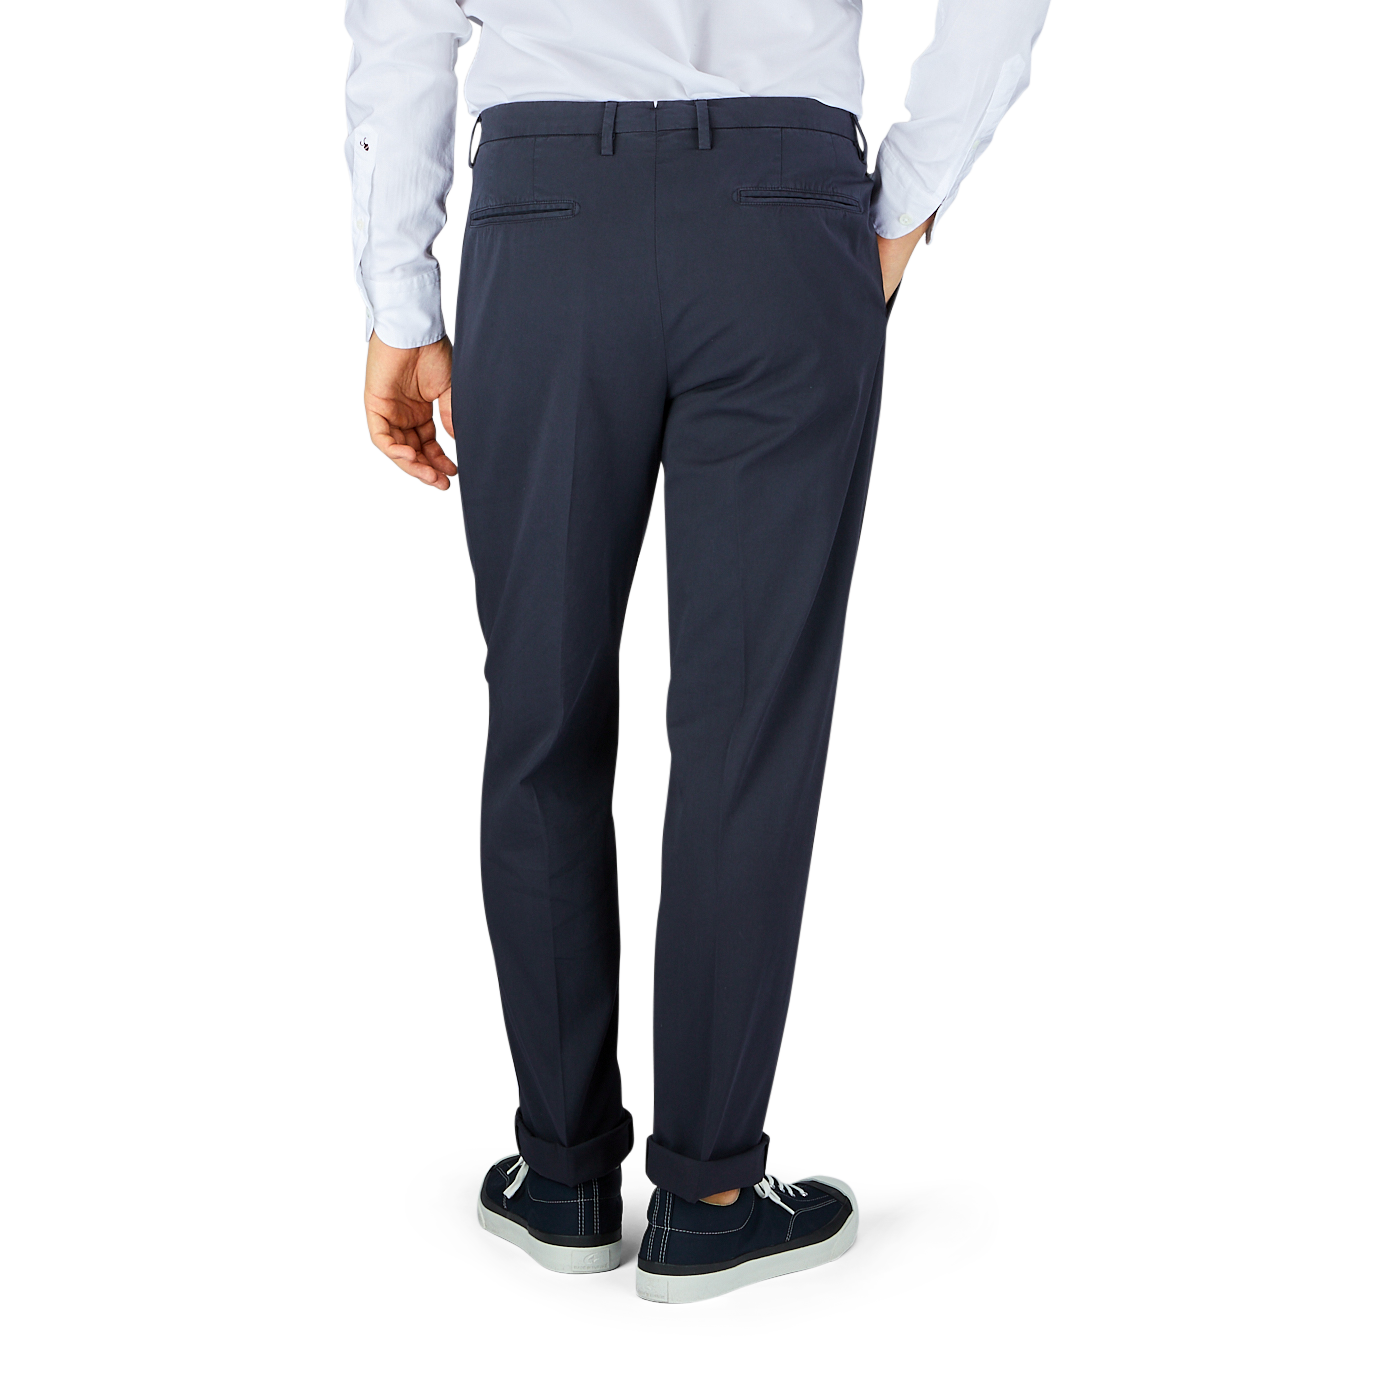 A man's legs in Boglioli navy blue washed cotton pleated trousers and hands in the back.